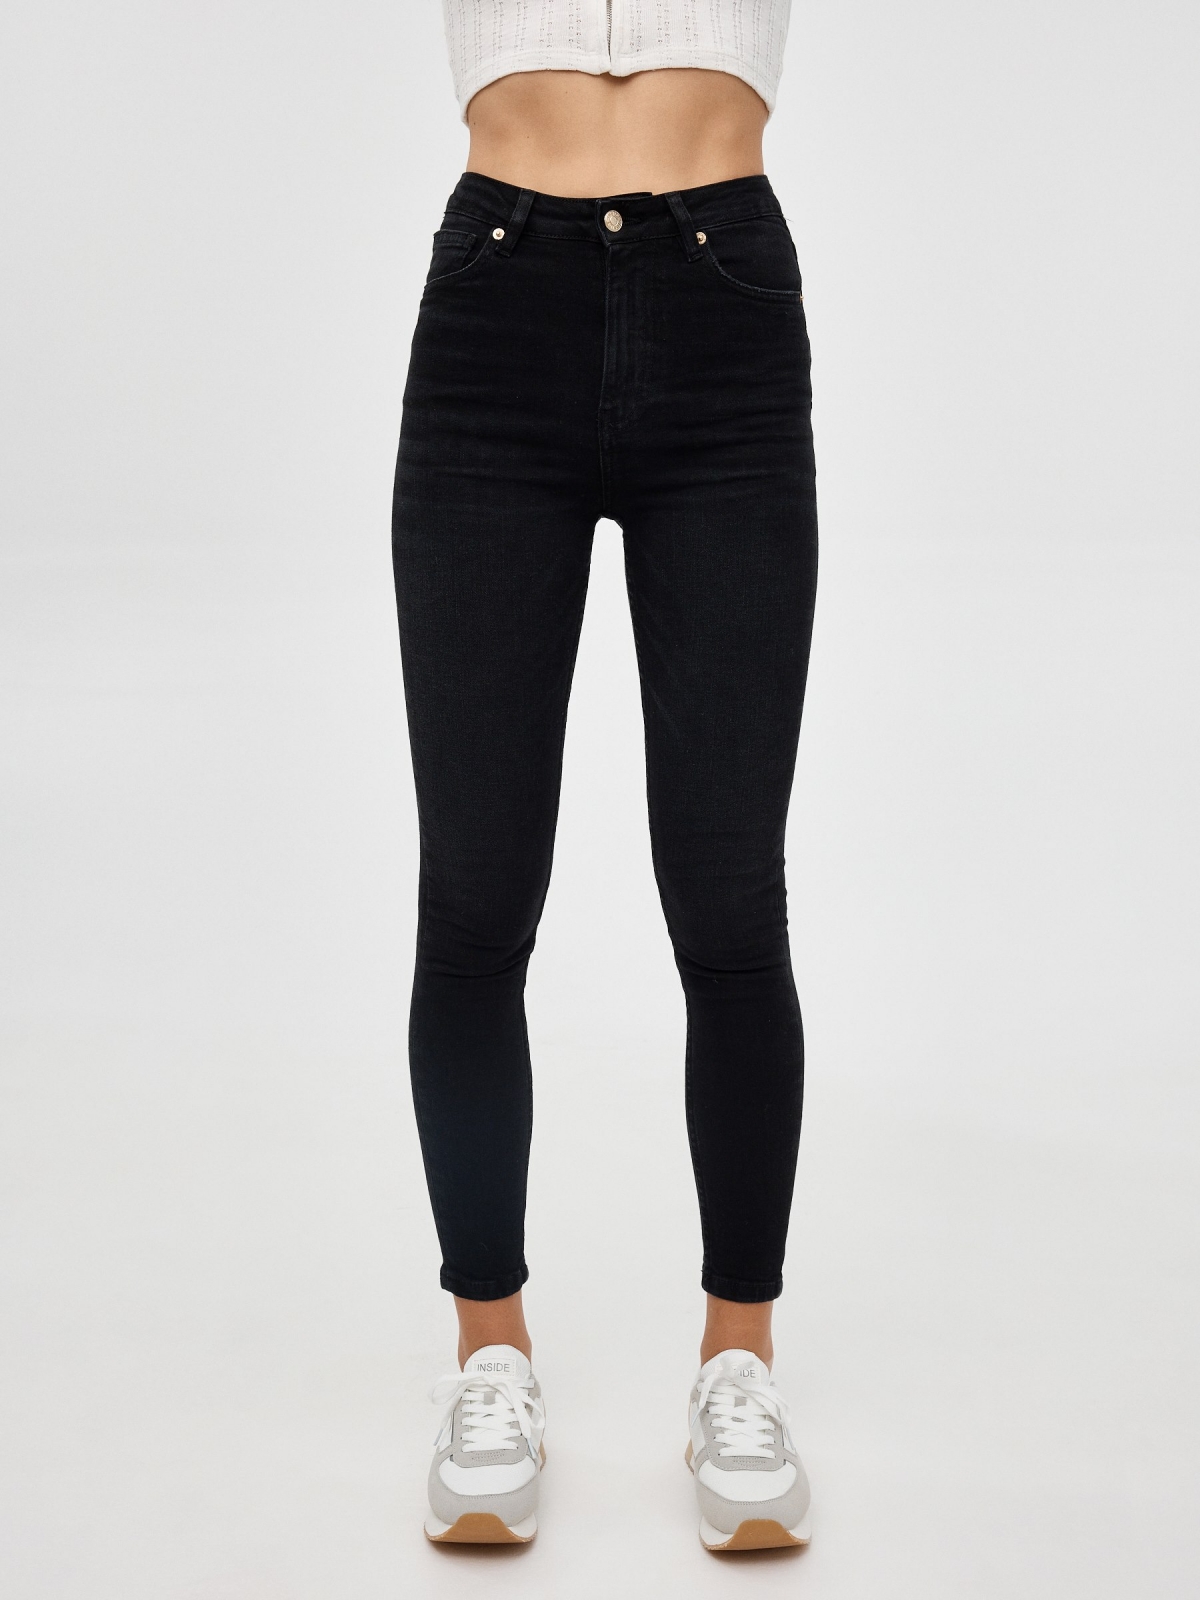 High rise skinny jeans black middle front view